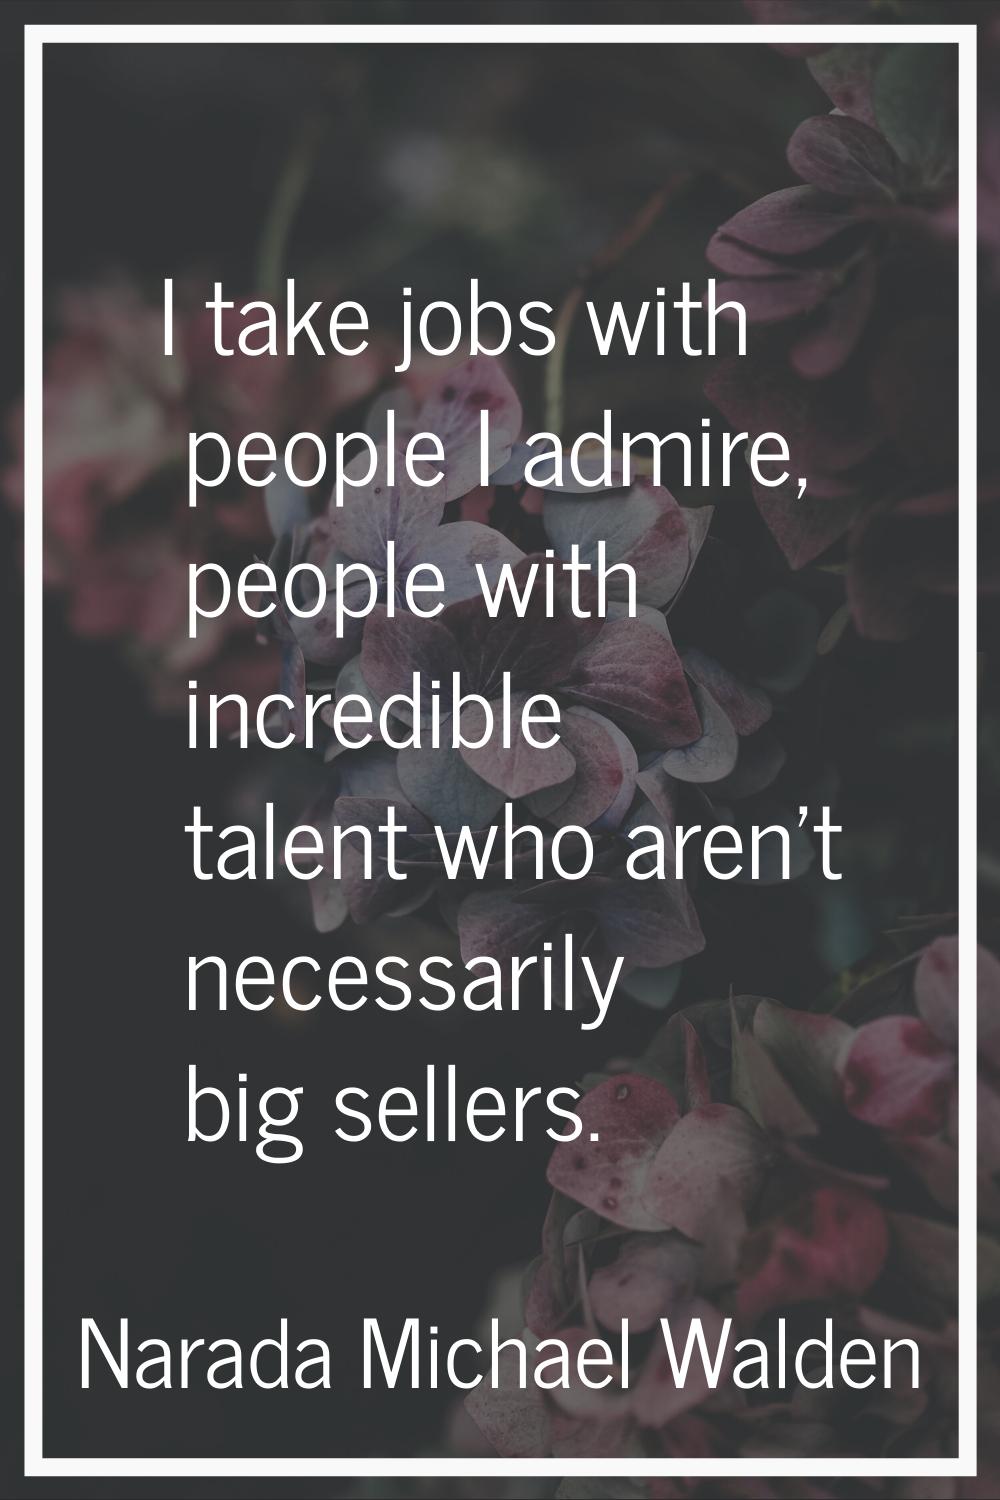 I take jobs with people I admire, people with incredible talent who aren't necessarily big sellers.